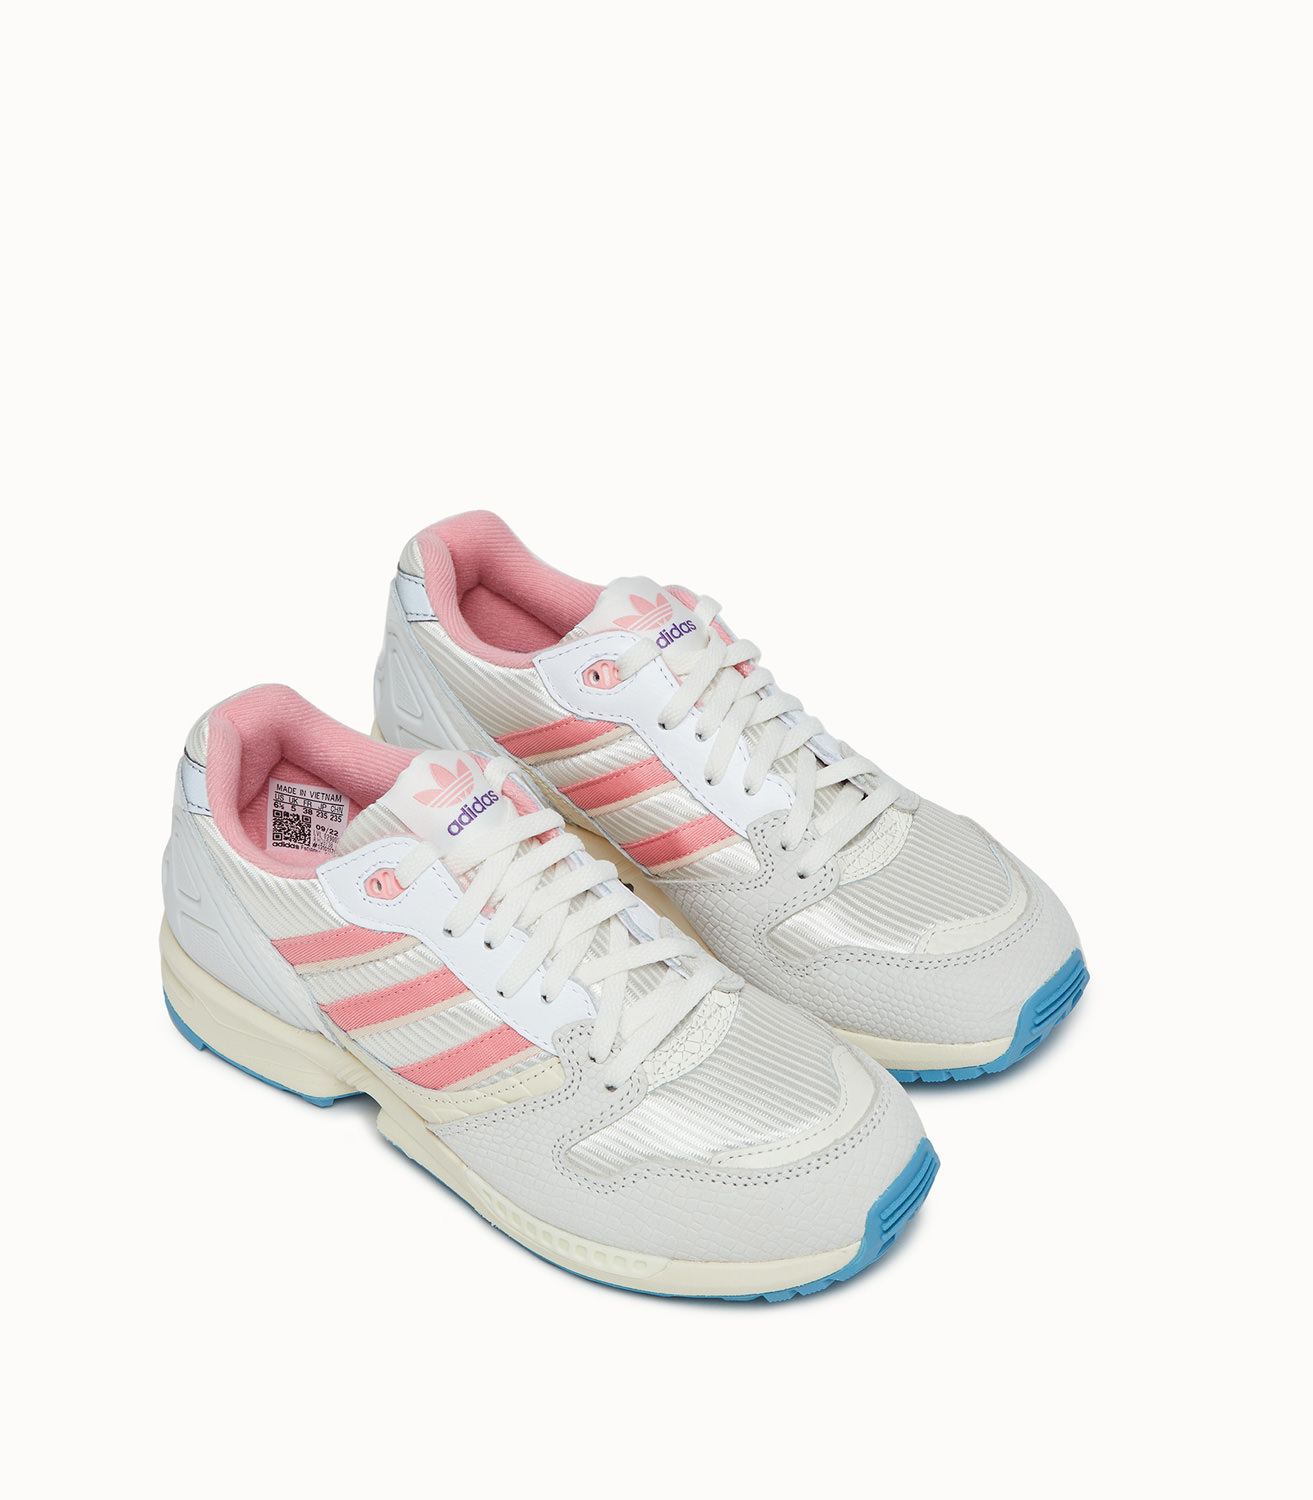 Modernisering zuigen bestrating ADIDAS ORIGINALS ZX 5020 SNEAKERS COLOR WHITE PINK | Playground